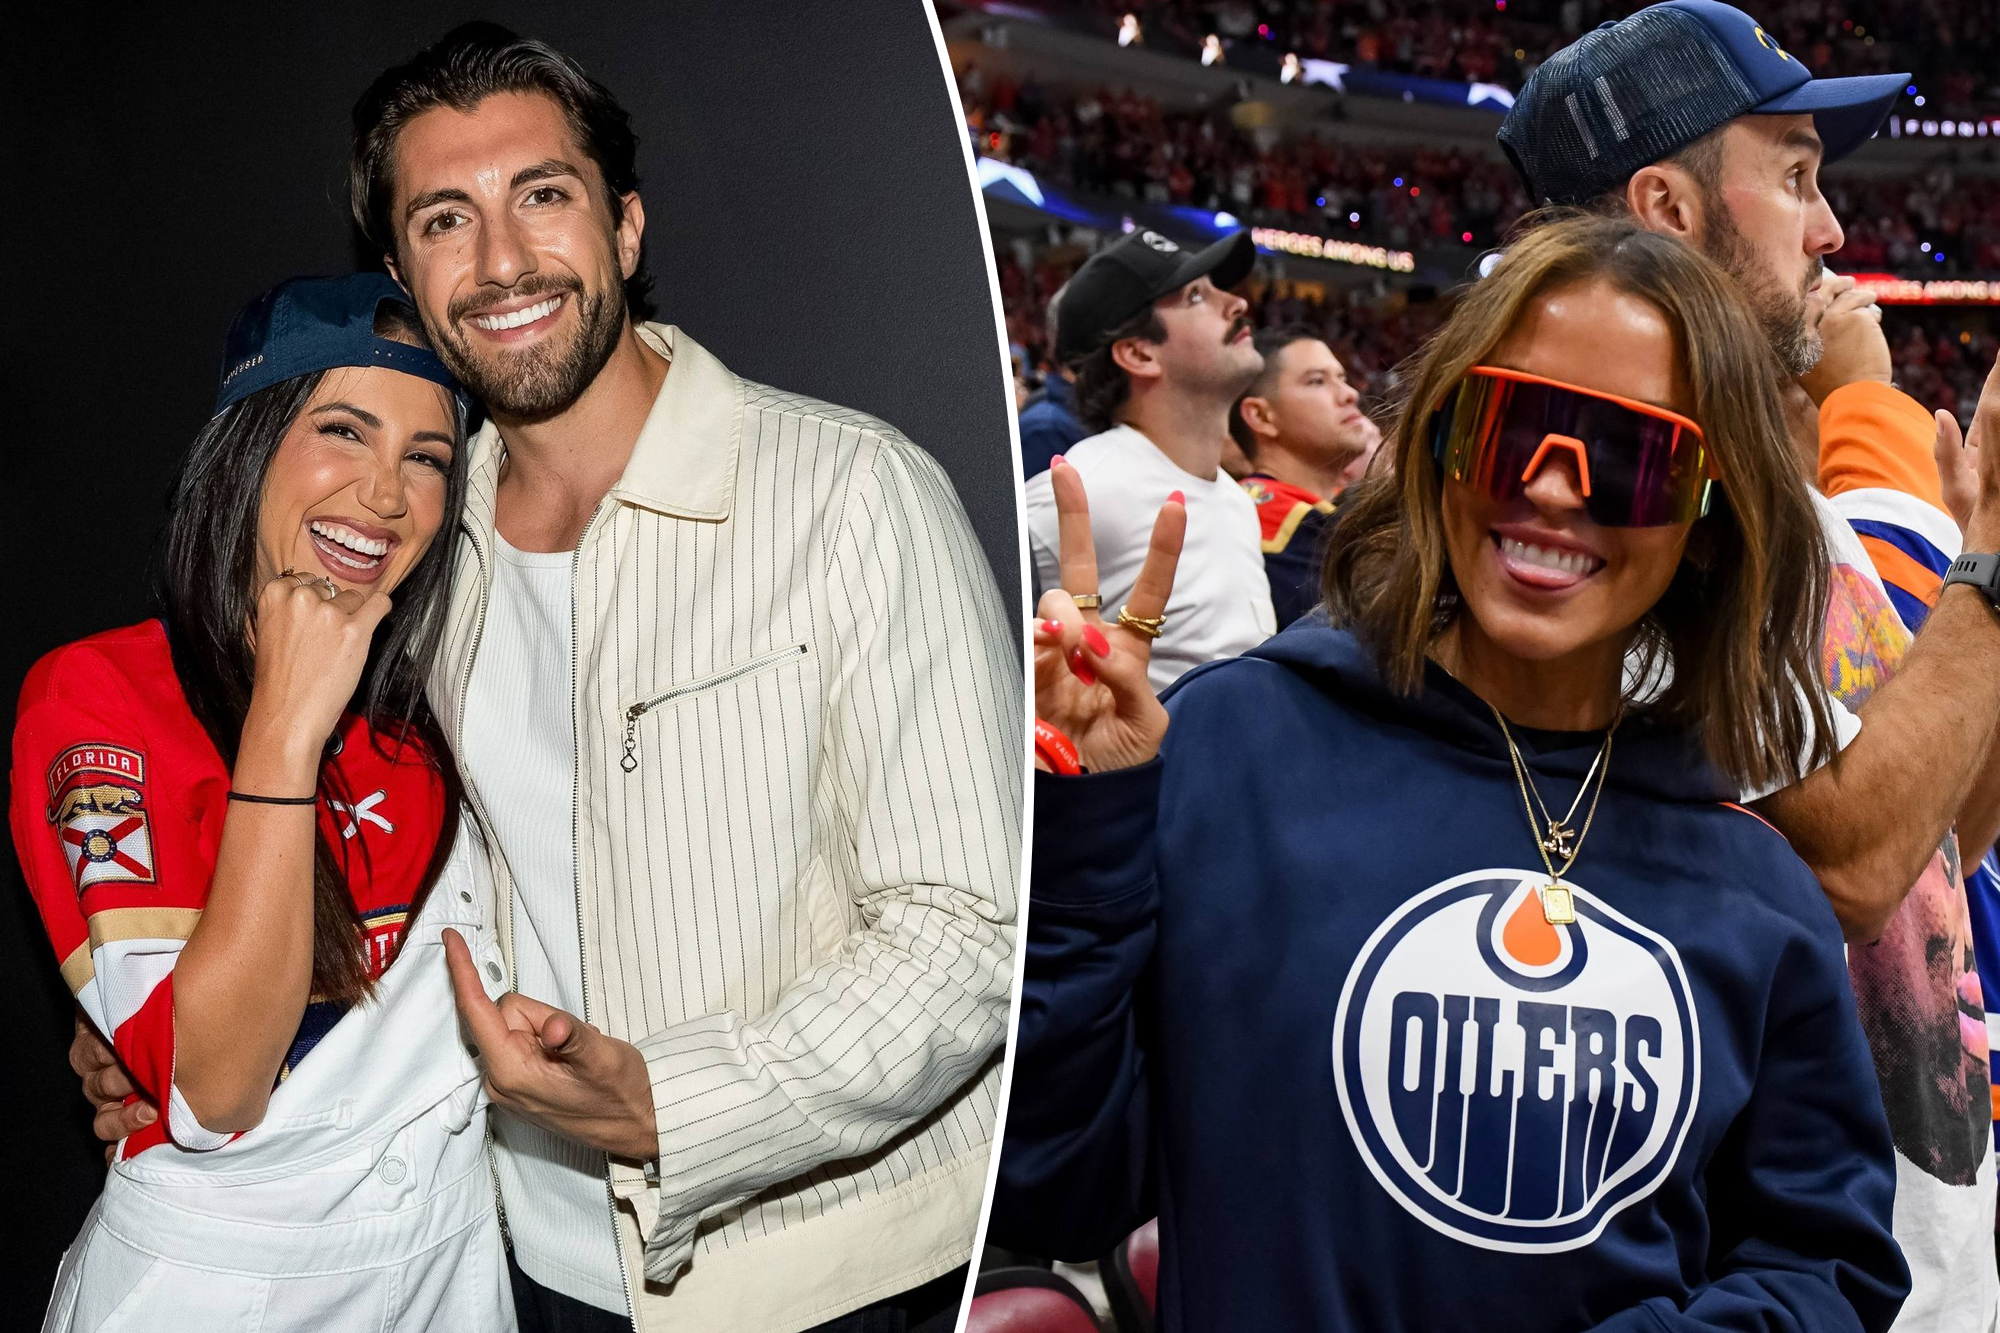 Kaitlyn Bristowe and Jason Tartick's Awkward NHL Encounter: Exes, New Flames, and Drama on Ice!